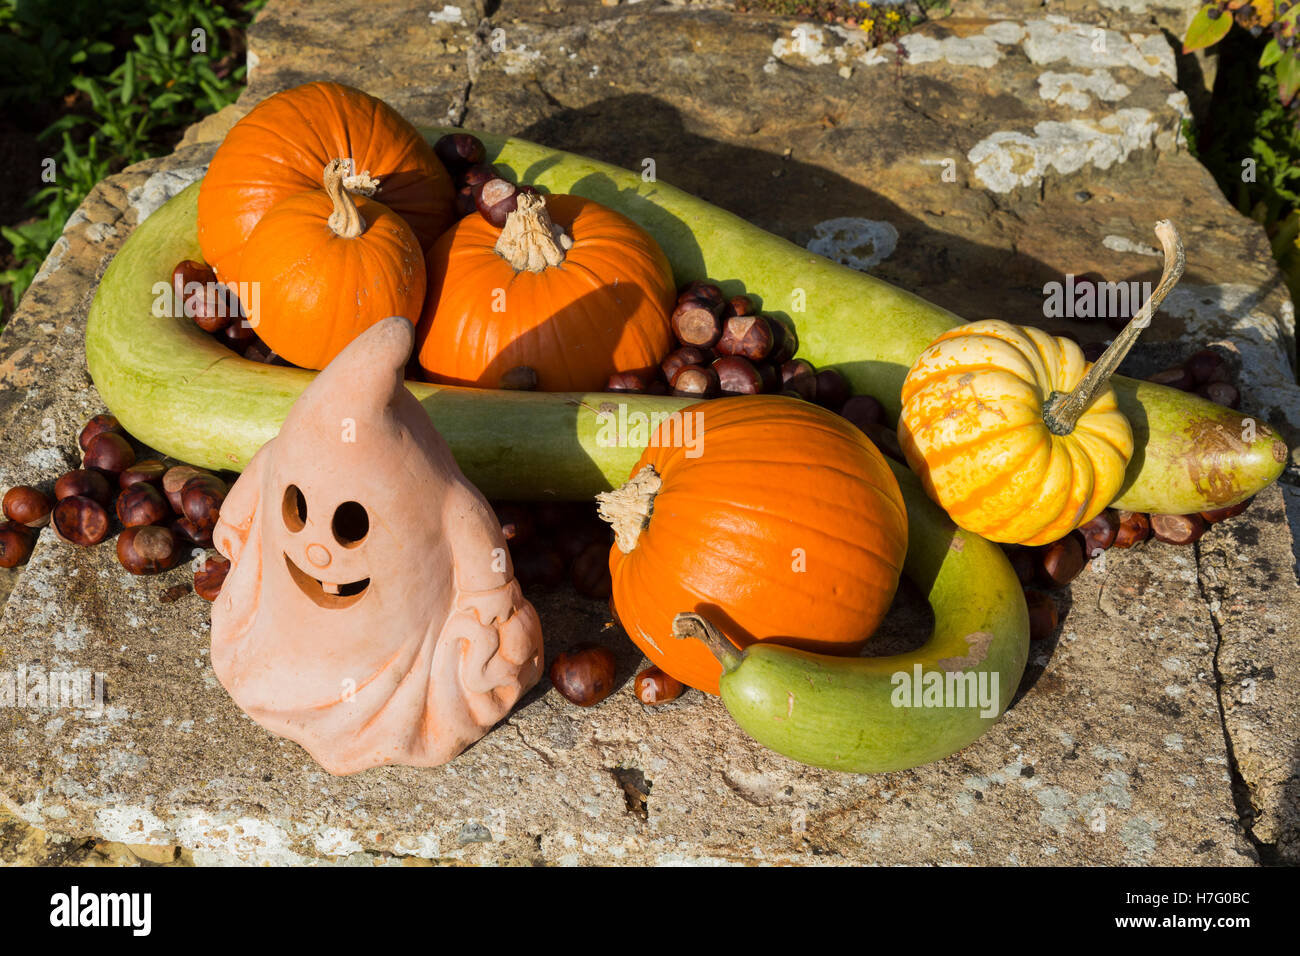 Arrangement of Halloween lantern lamp with autumnal ornamental gourds ( gourd ), squashes ( squash ) and nuts, in the autumn. UK Stock Photo